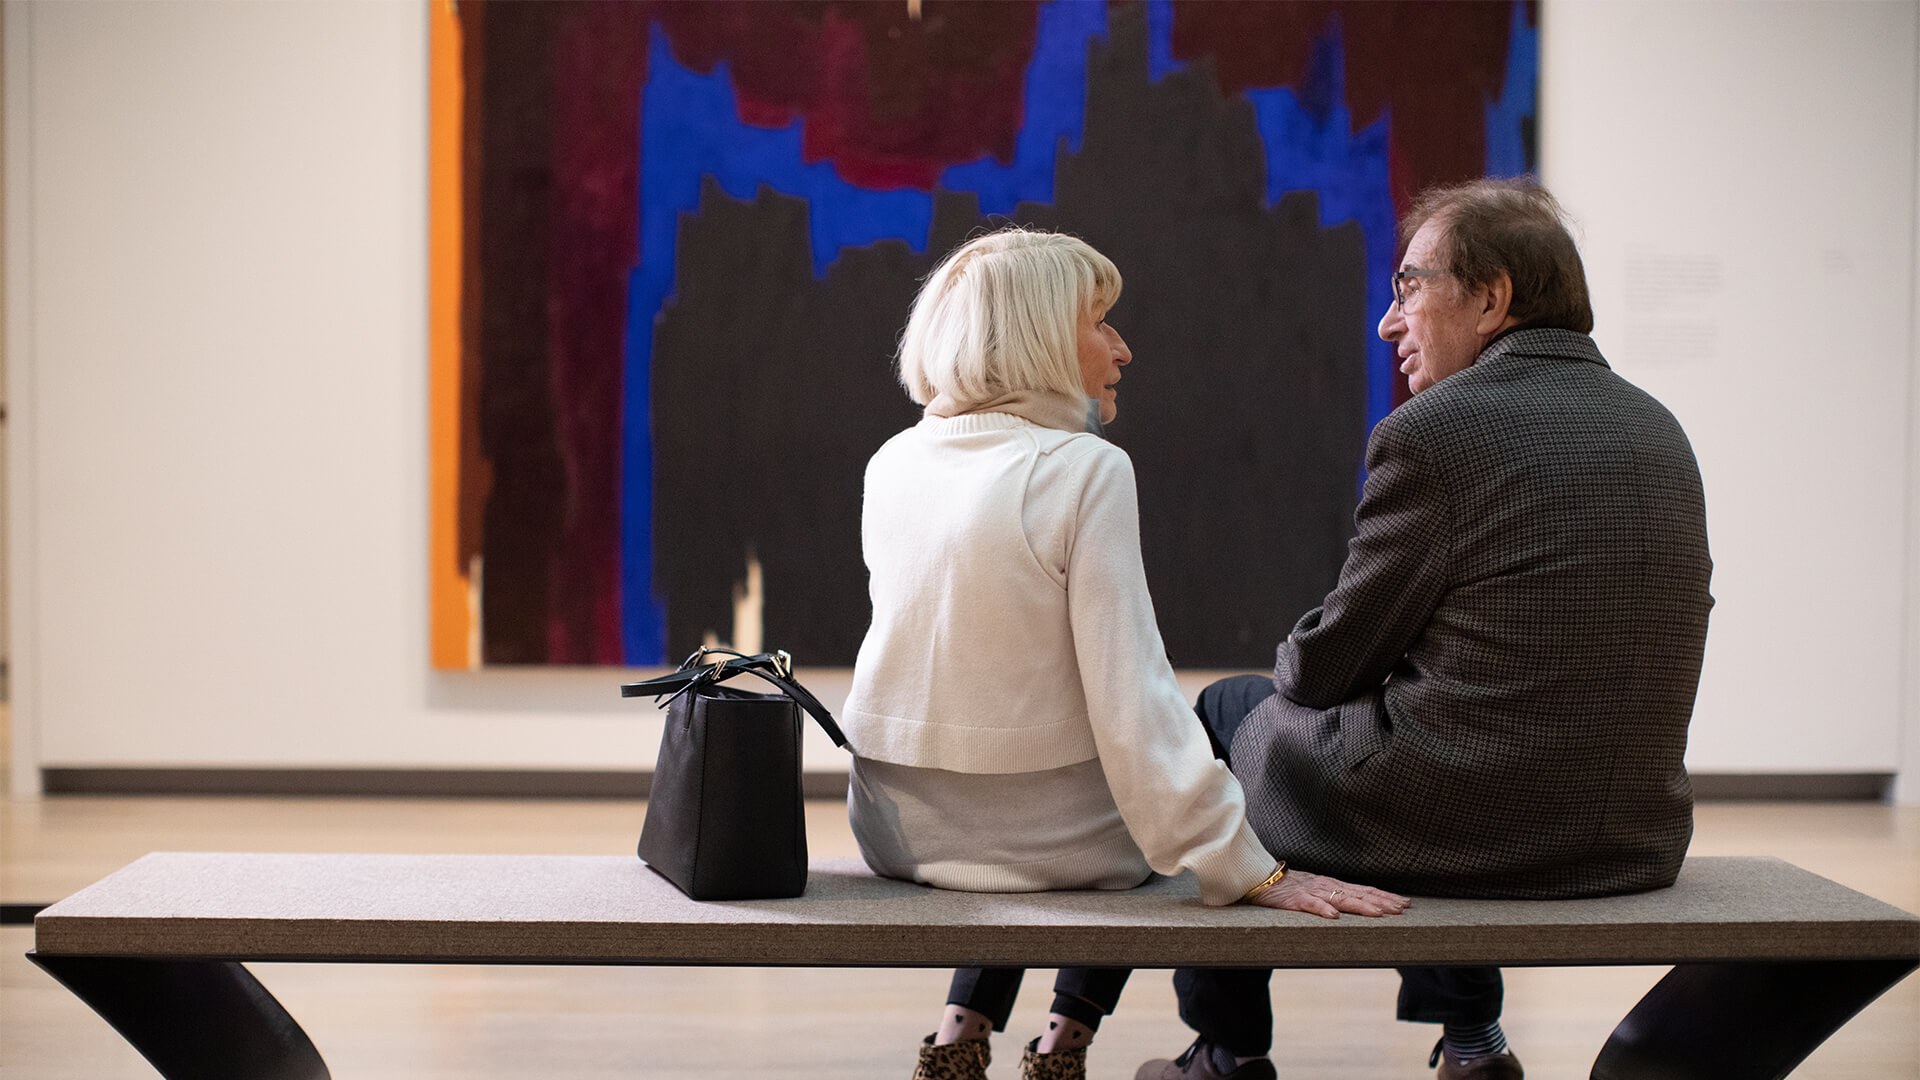 An older couple sits on a bench and looks at each other with a large colorful abstract painting in front of them